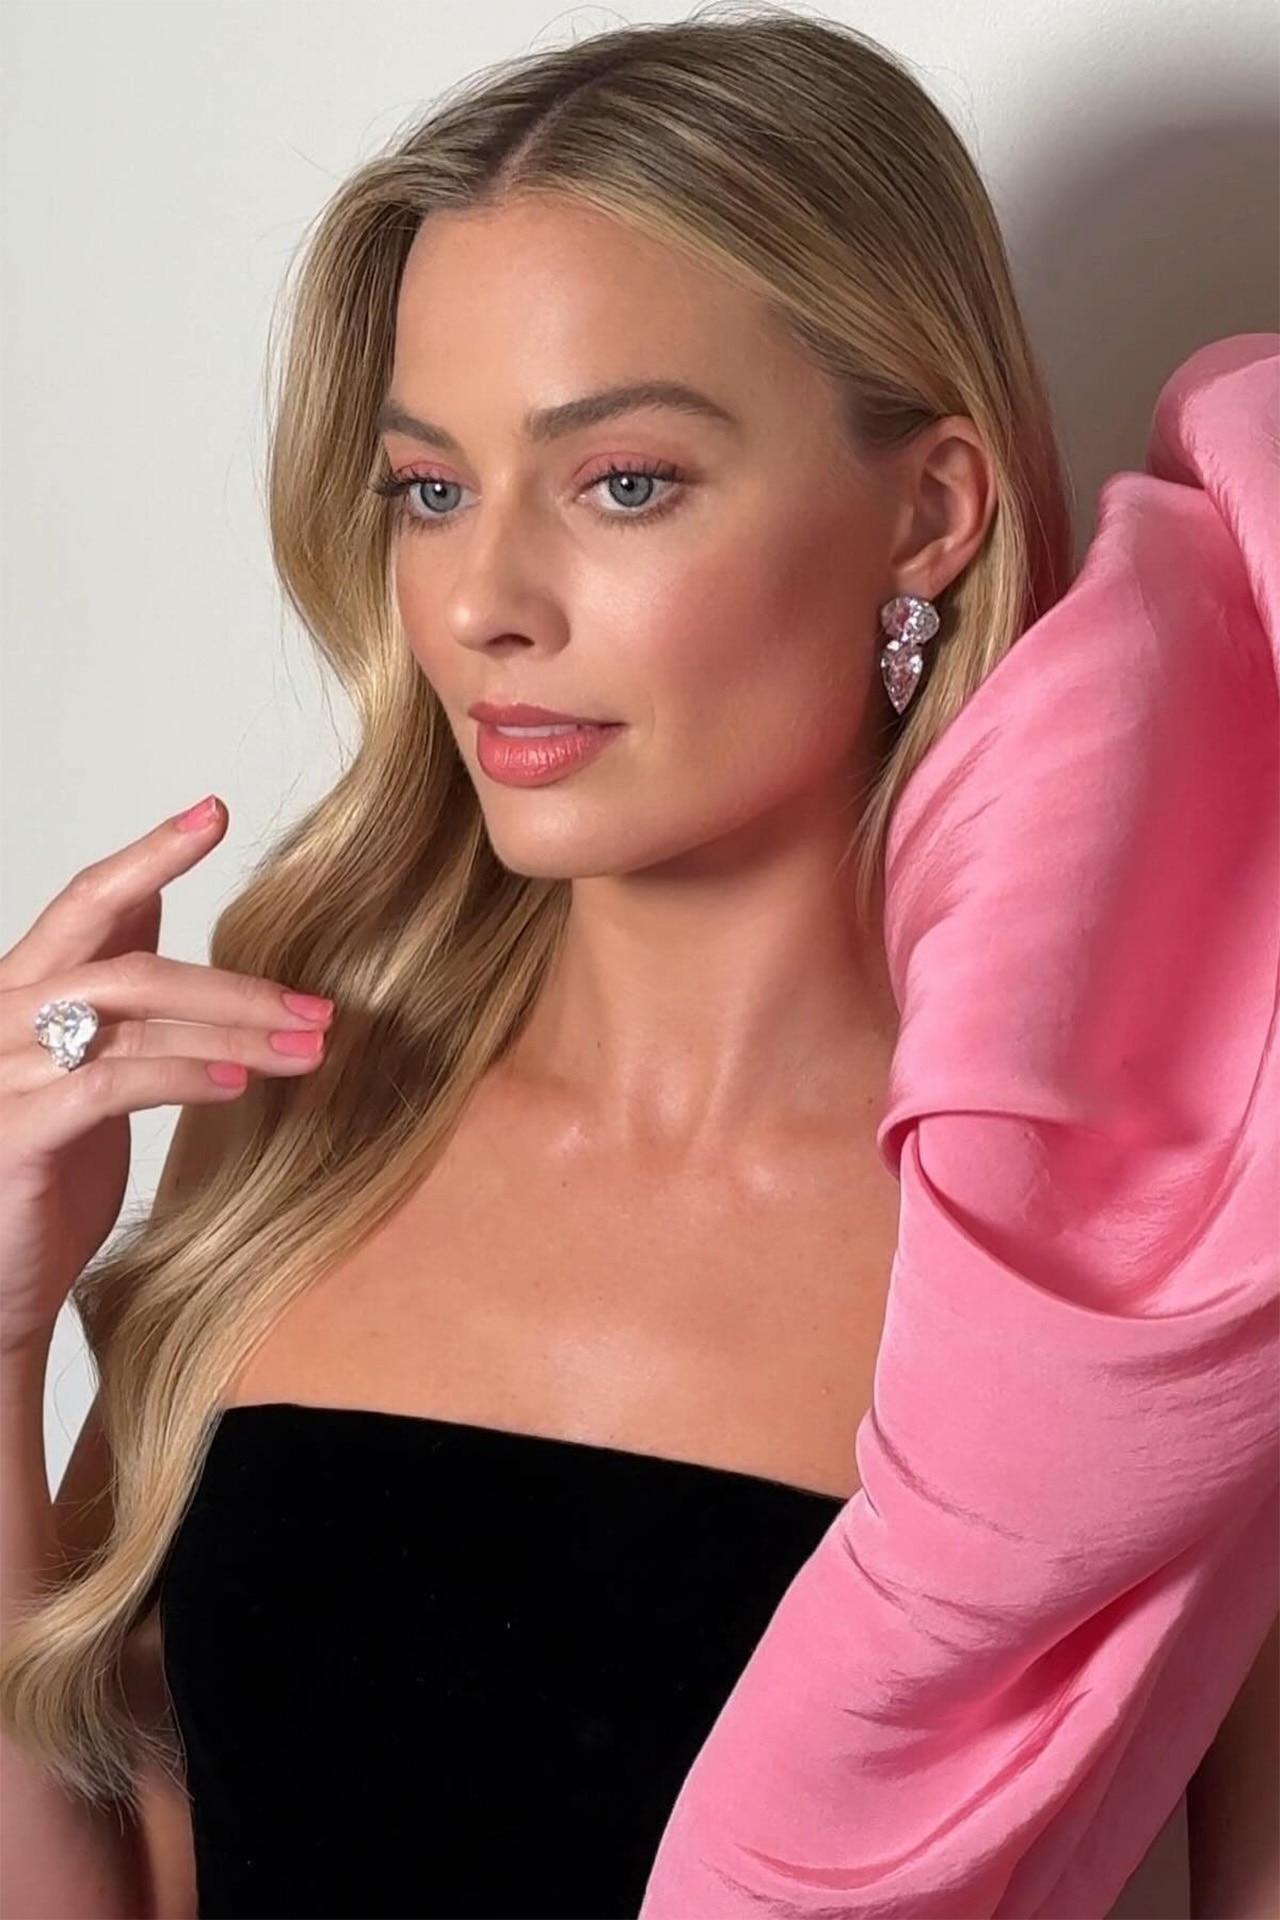 Vintage jelly shoes inspired Margot Robbie’s “plastic” pink manicure